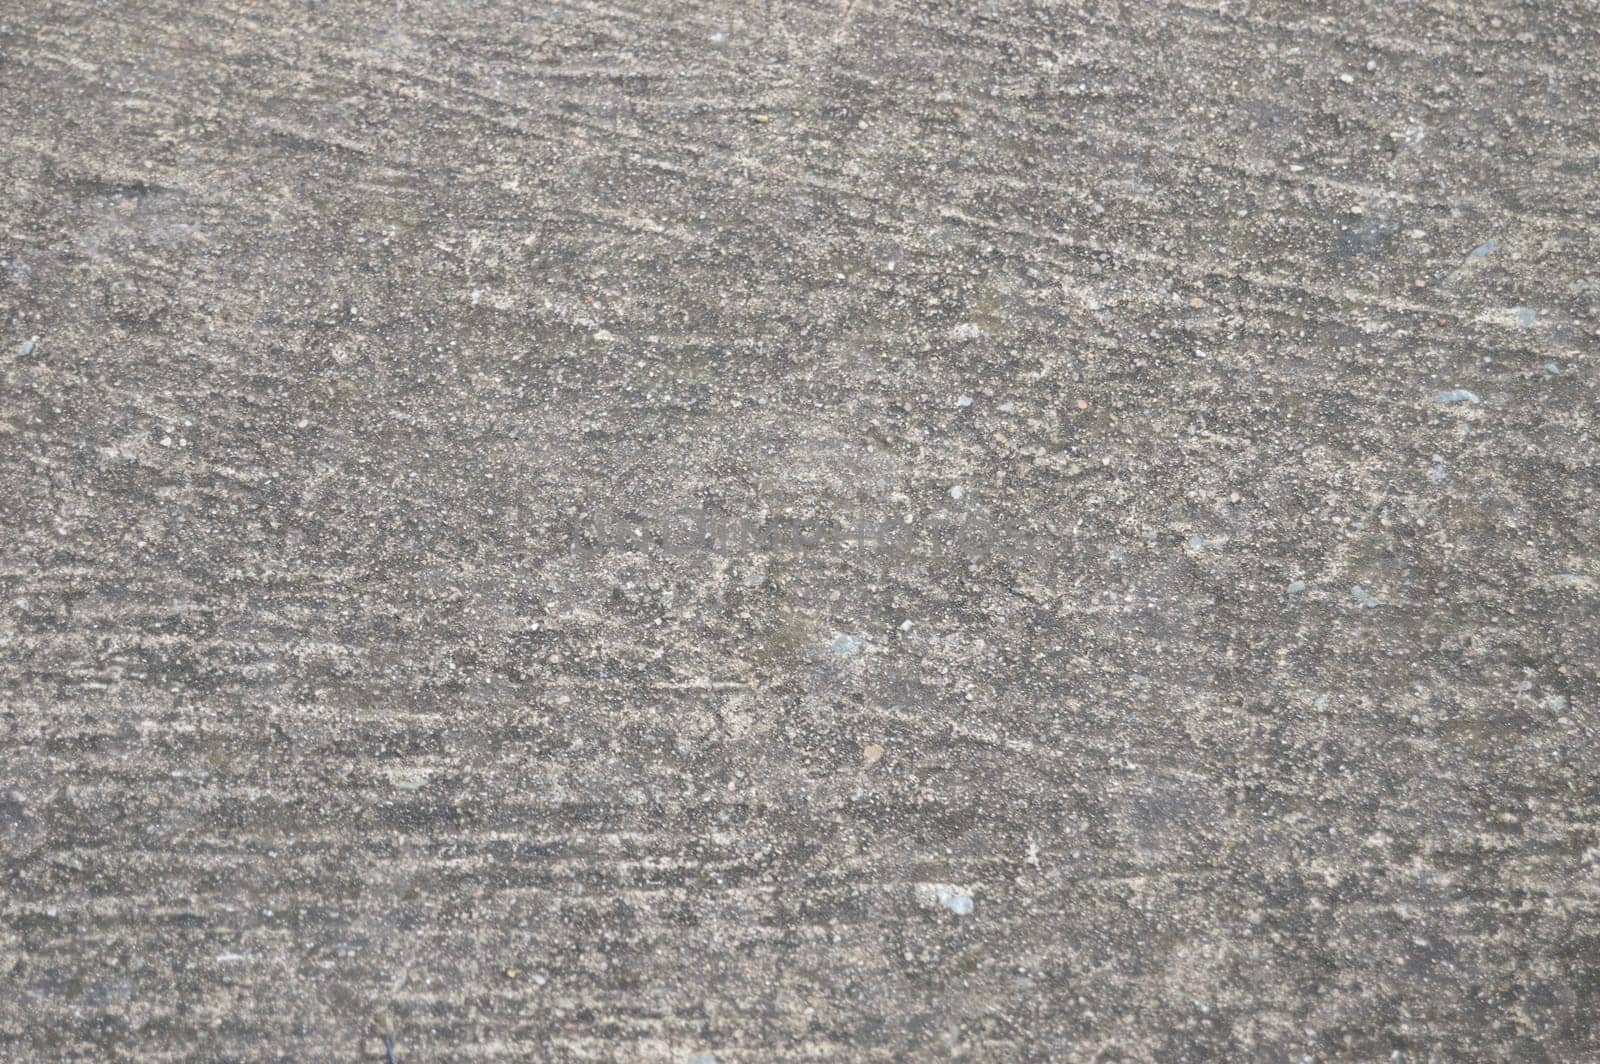 Rough cement surface, used as a background image.